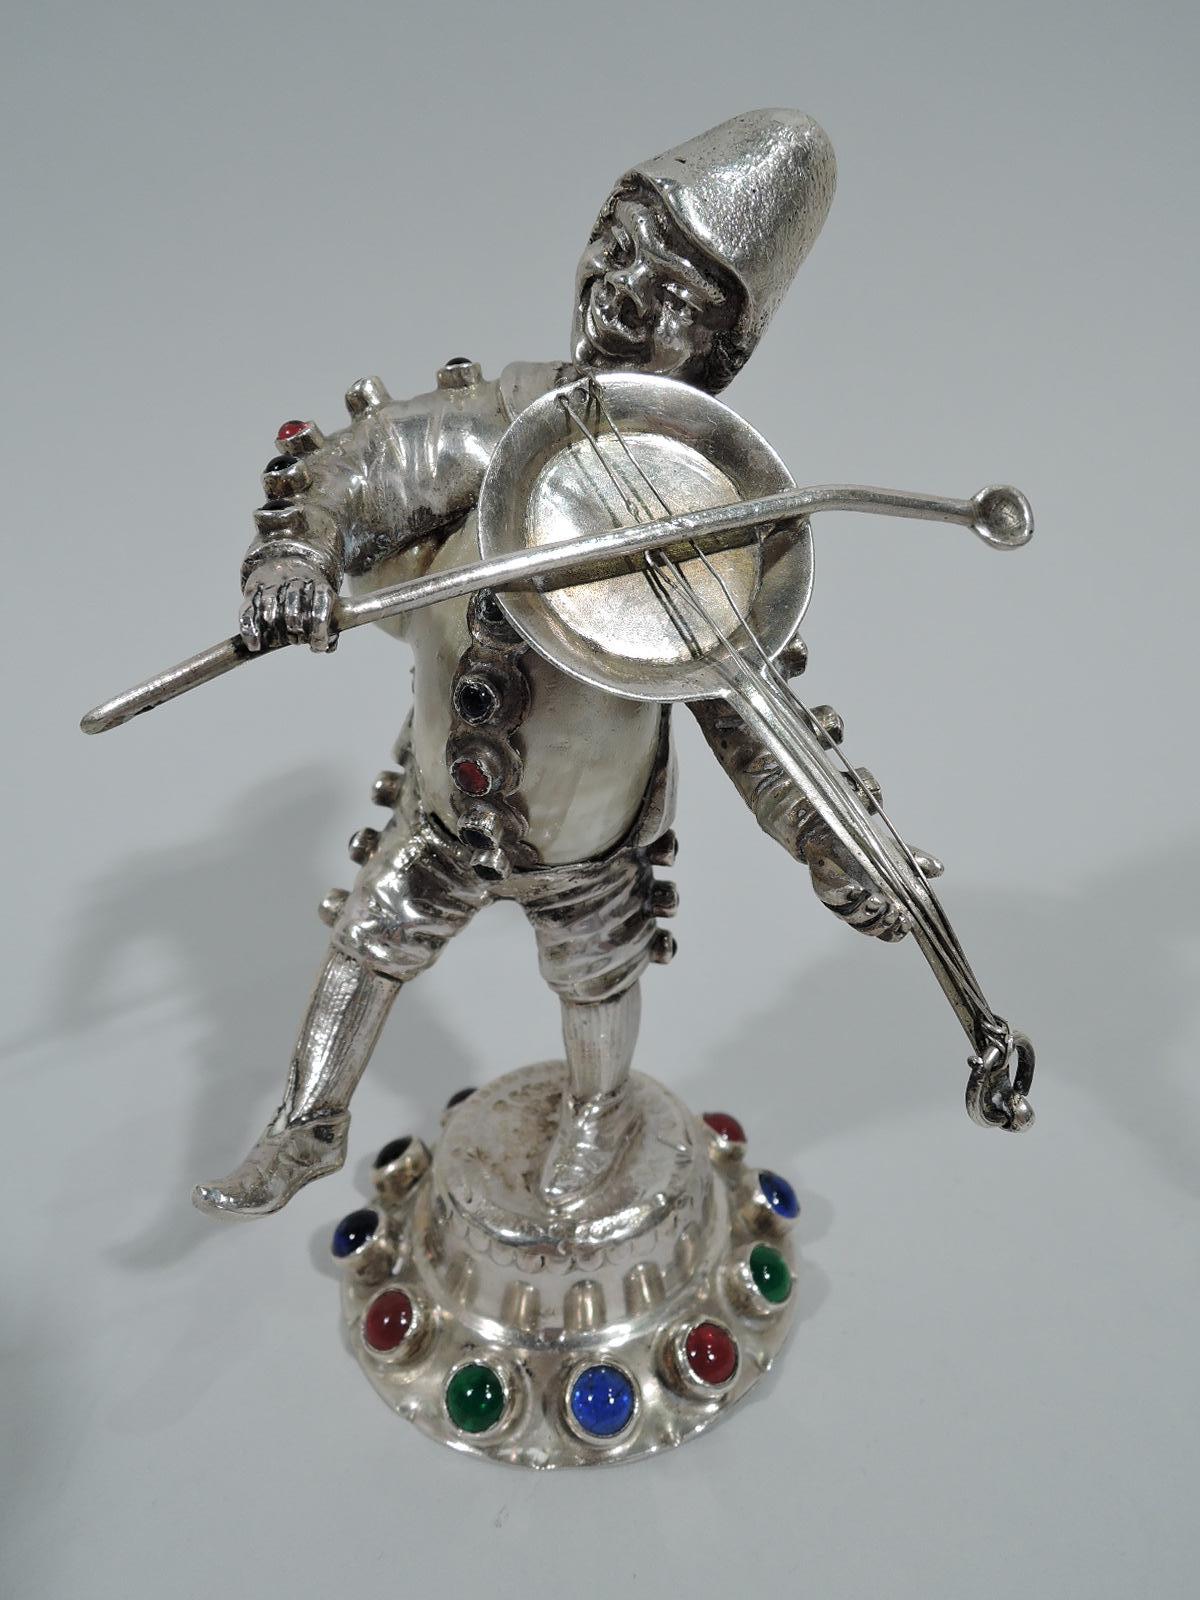 Five German 812 silver figures, ca 1880. This set comprises two musicians, a tankard-bearing tavern keeper, a fowl-serving wench, and a dagger-wielding pierrot let loose among these peaceful country folk. Each figure is silver and inset with